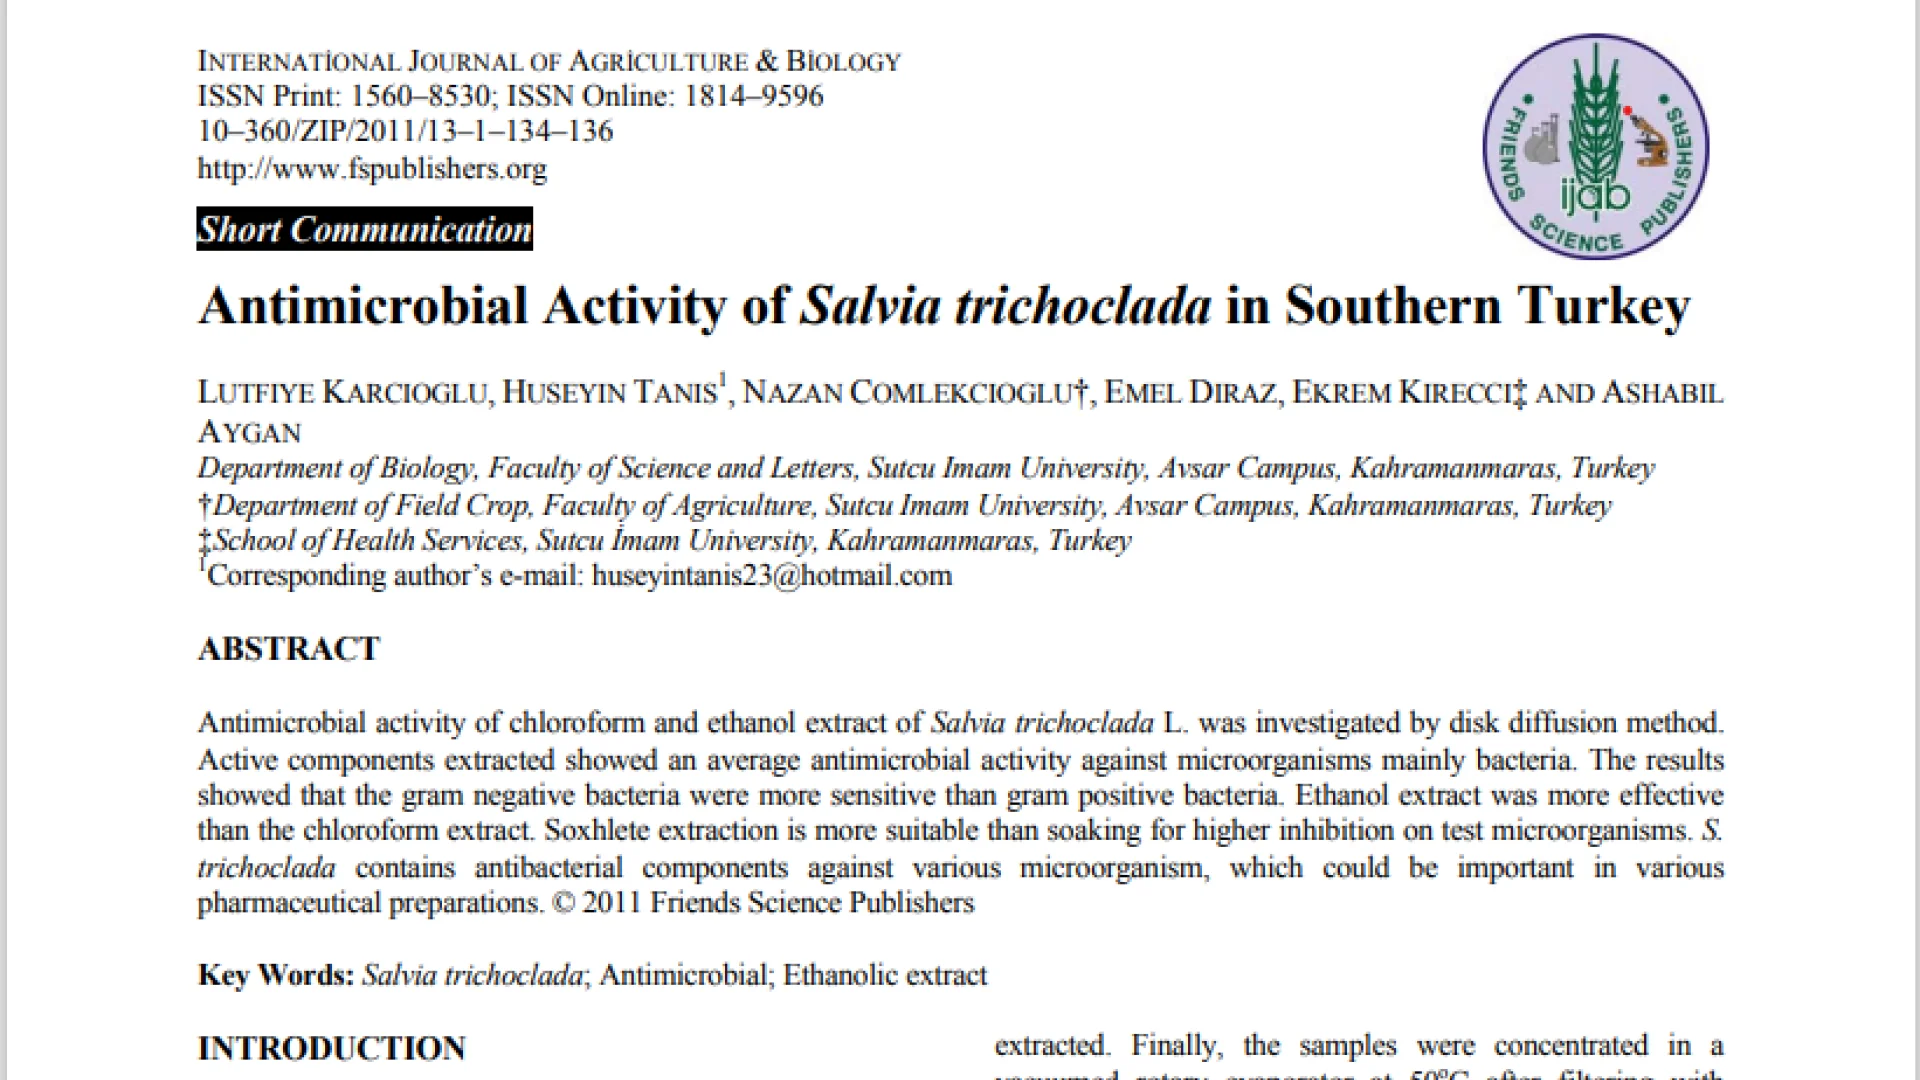 Antimicrobial Activity of Salvia trichoclada in Southern Turkey